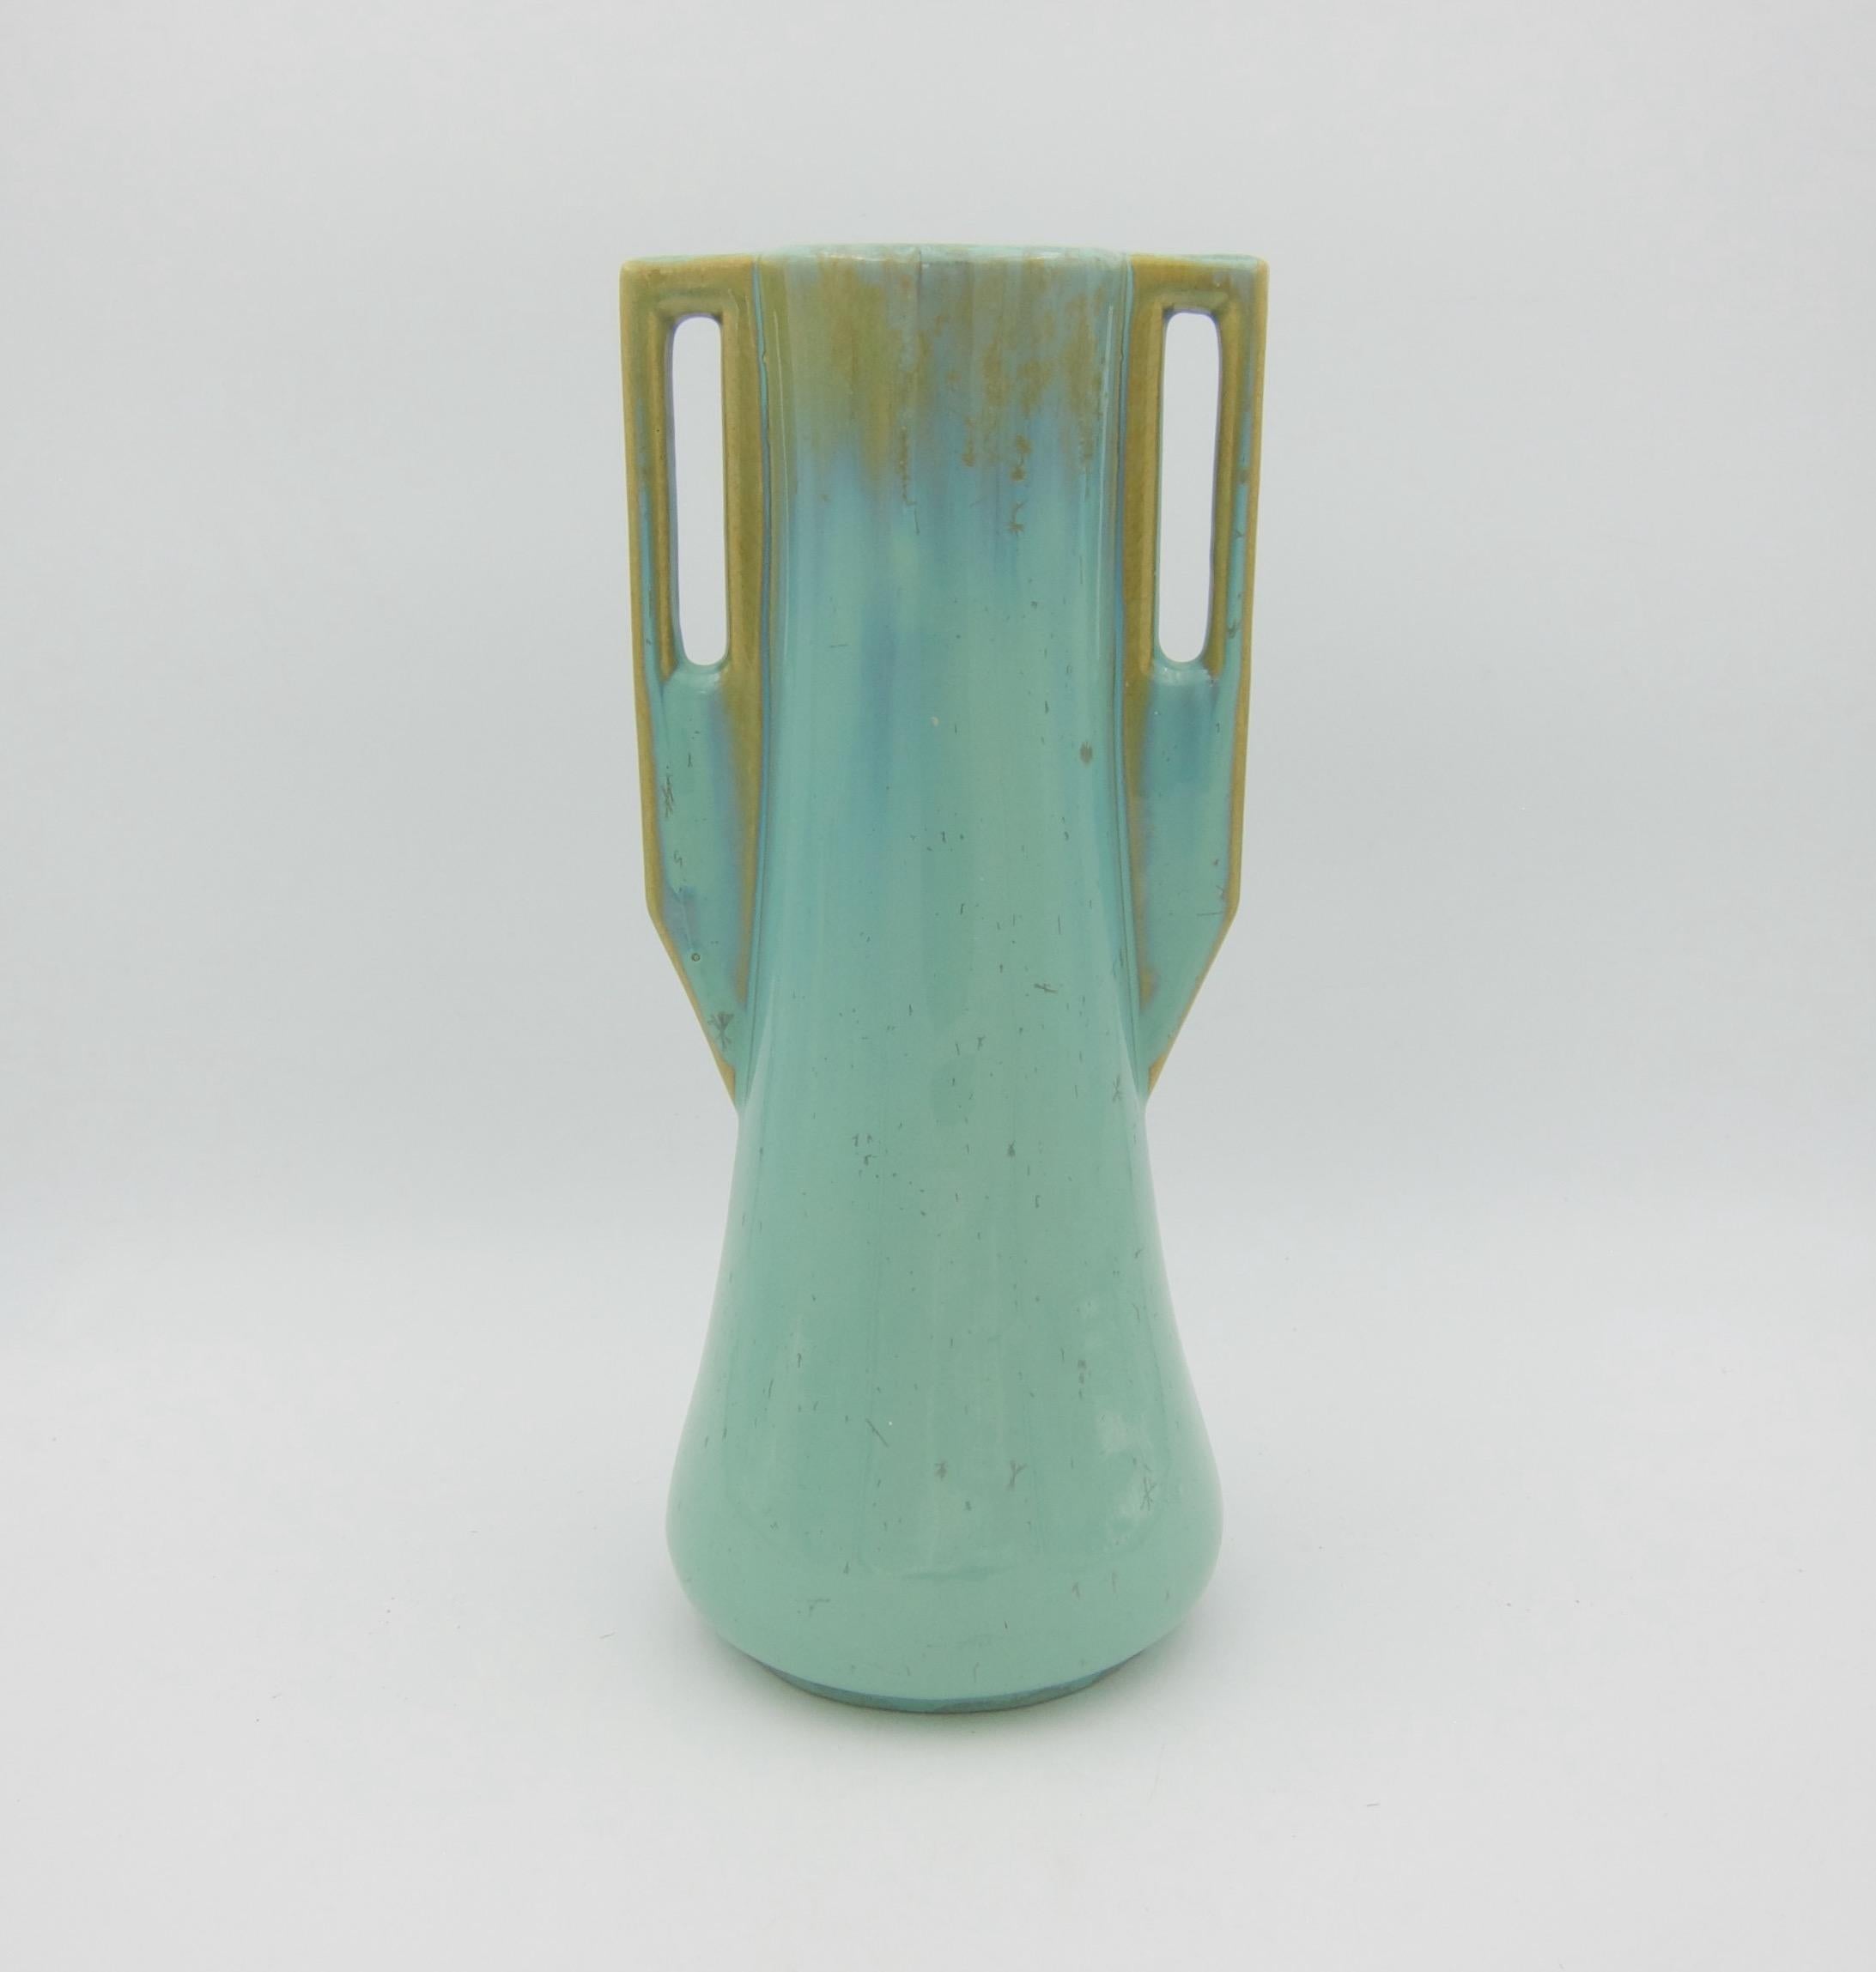 Glazed Early 20th Century Fulper Pottery Double Handle Vase with a Green Flambe Glaze